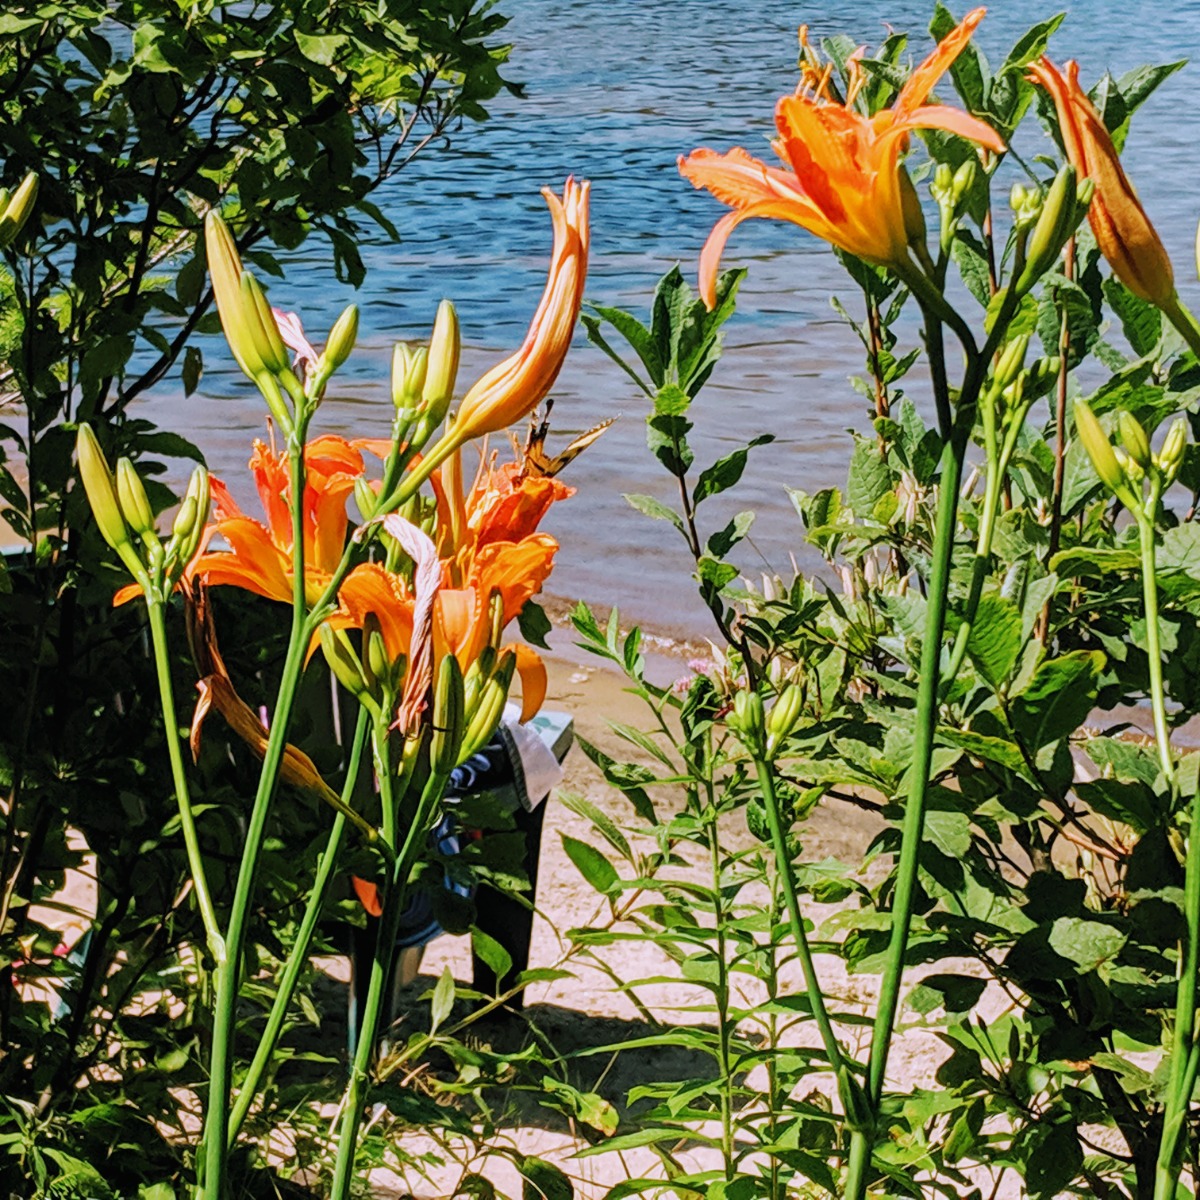 Common Orange Daylilies at Lake Pleasant in Speculator, NY (2019)